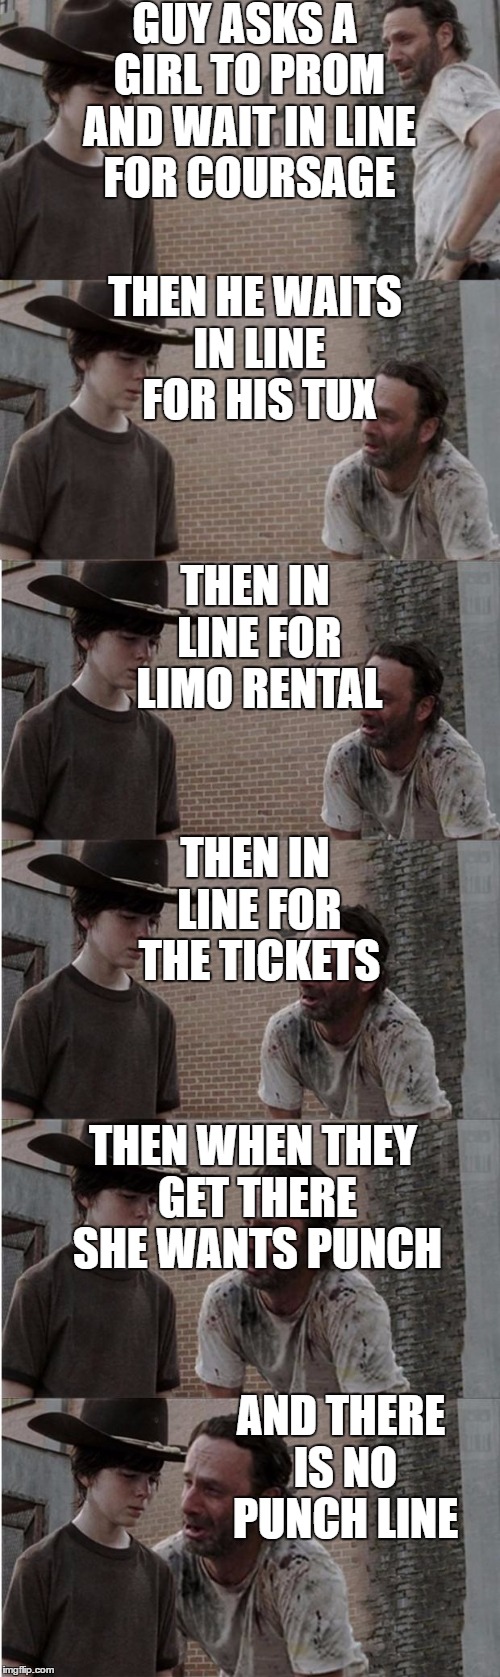 Rick and Carl Longer Meme | GUY ASKS A GIRL TO PROM AND WAIT IN LINE FOR COURSAGE; THEN HE WAITS IN LINE FOR HIS TUX; THEN IN LINE FOR LIMO RENTAL; THEN IN LINE FOR THE TICKETS; THEN WHEN THEY GET THERE SHE WANTS PUNCH; AND THERE IS NO PUNCH LINE | image tagged in memes,rick and carl longer | made w/ Imgflip meme maker